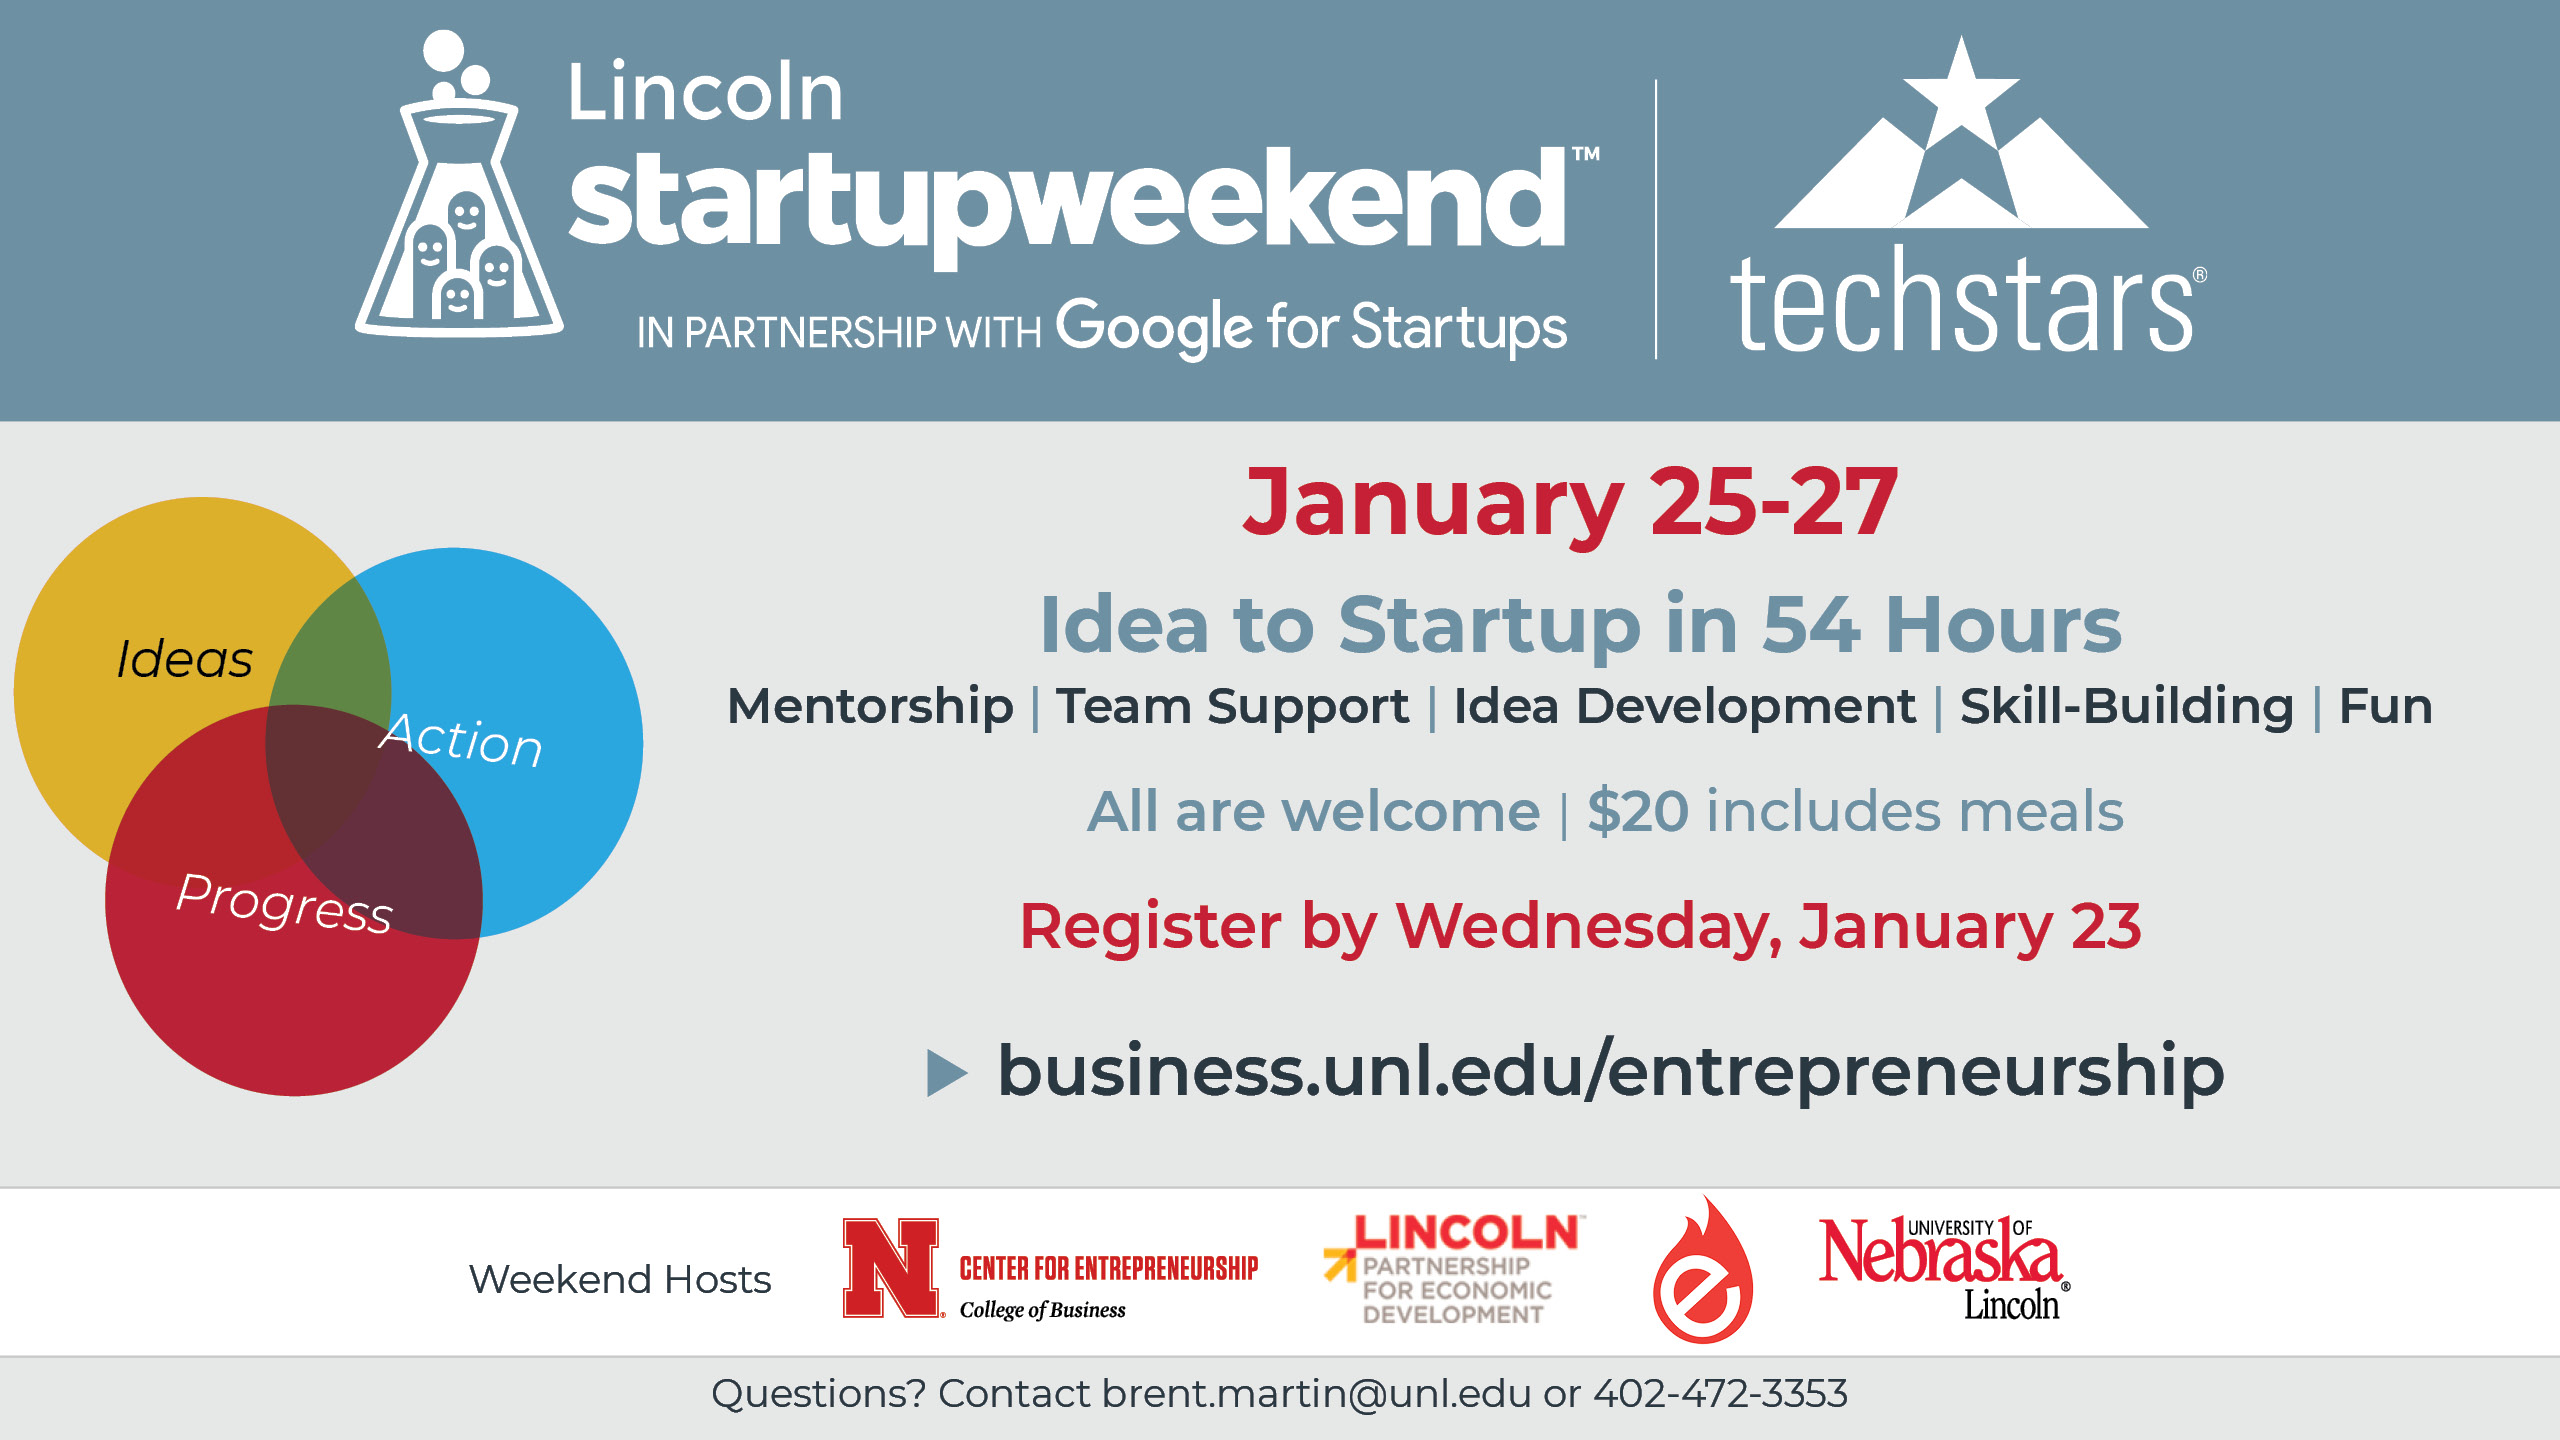 Lincoln Startup